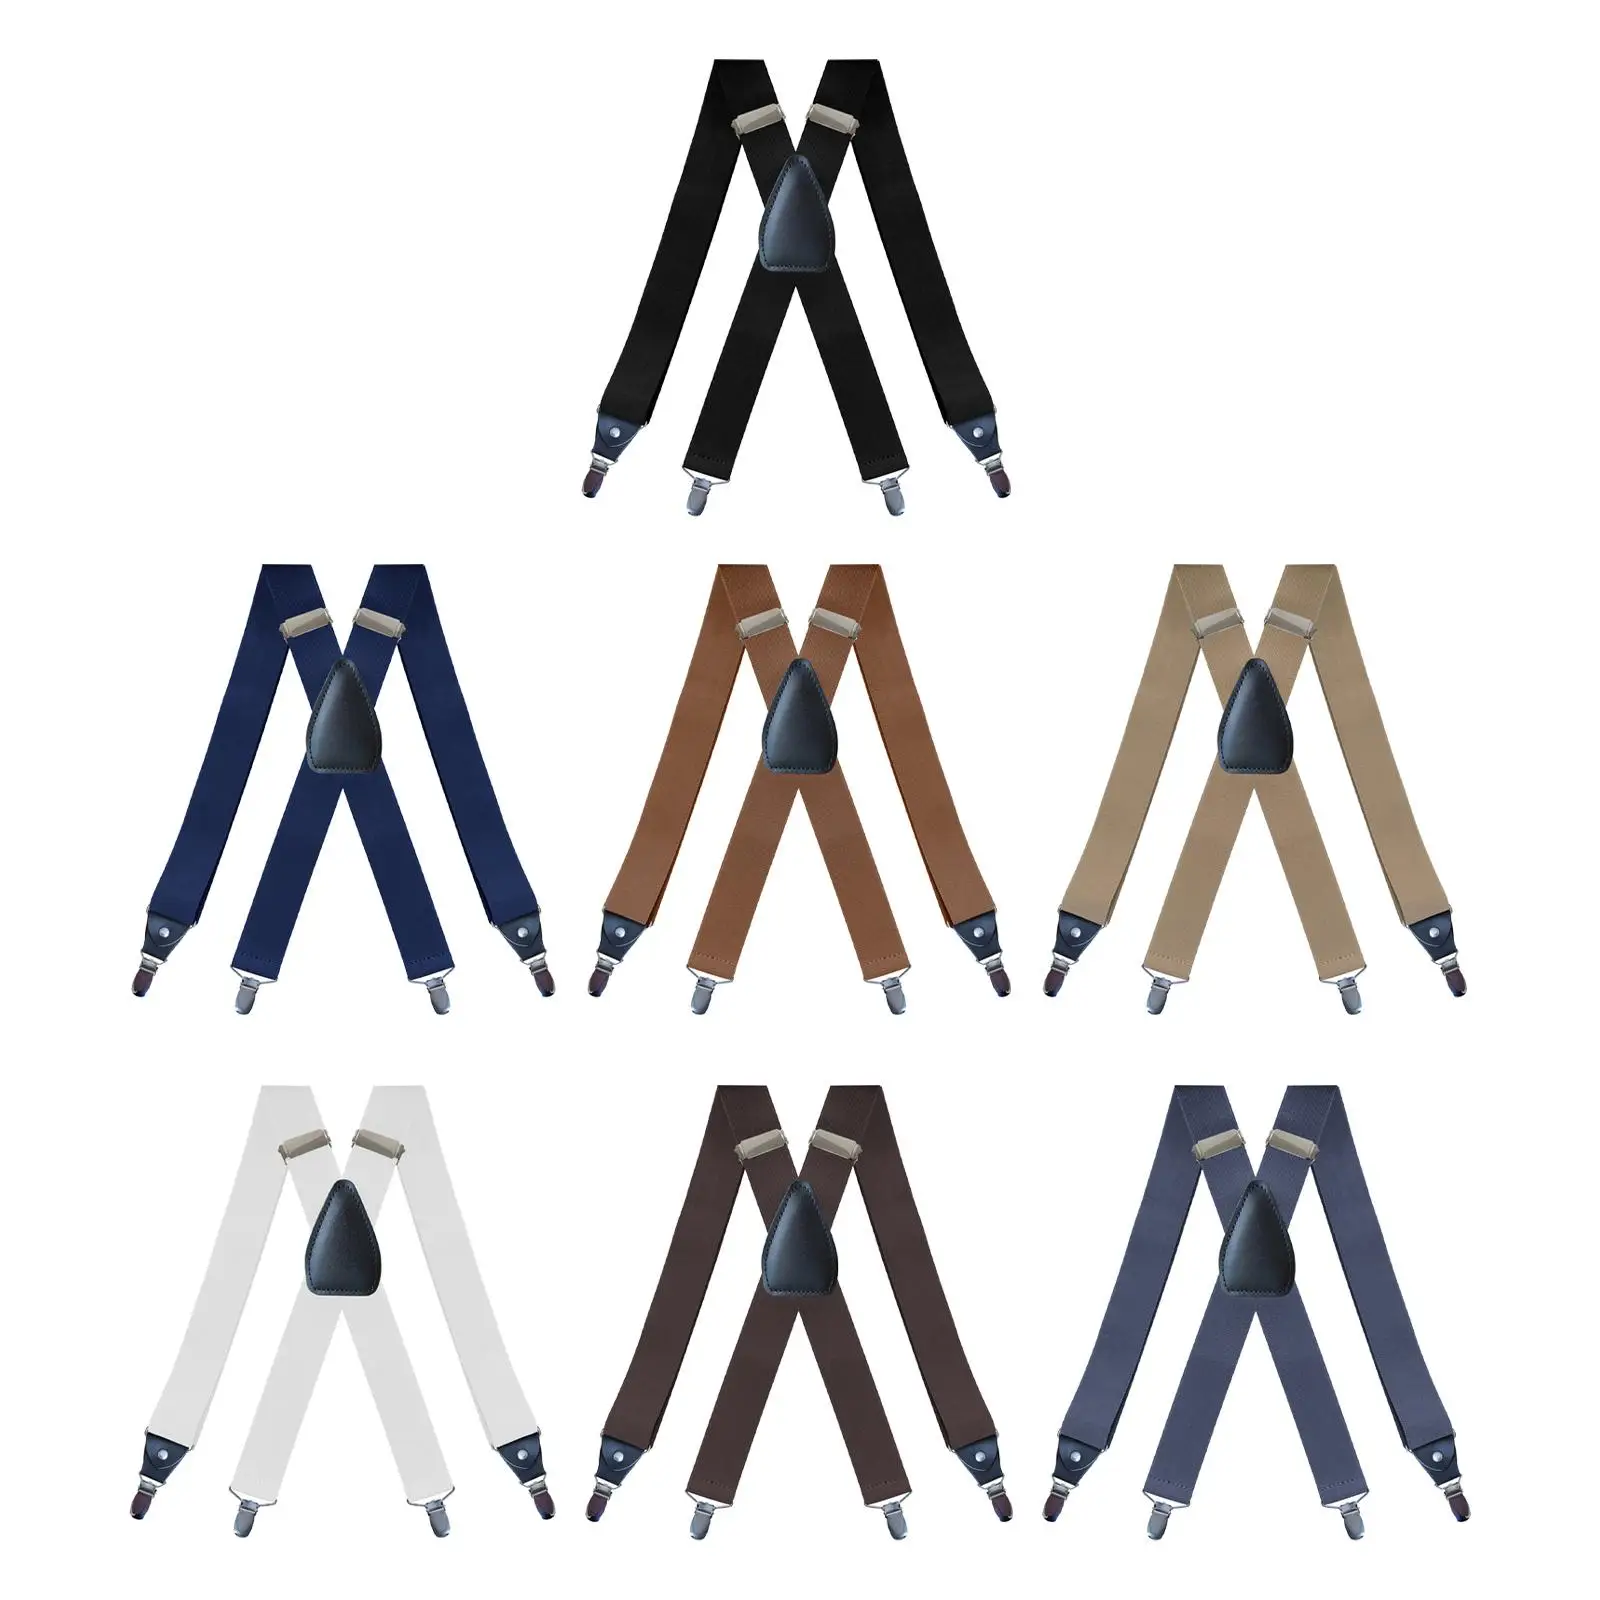 Suspenders for Shape Elastic with 4 Clips Solid Adjustable 1.38 Inch Wide Fits All Heavy Duty Suspenders for